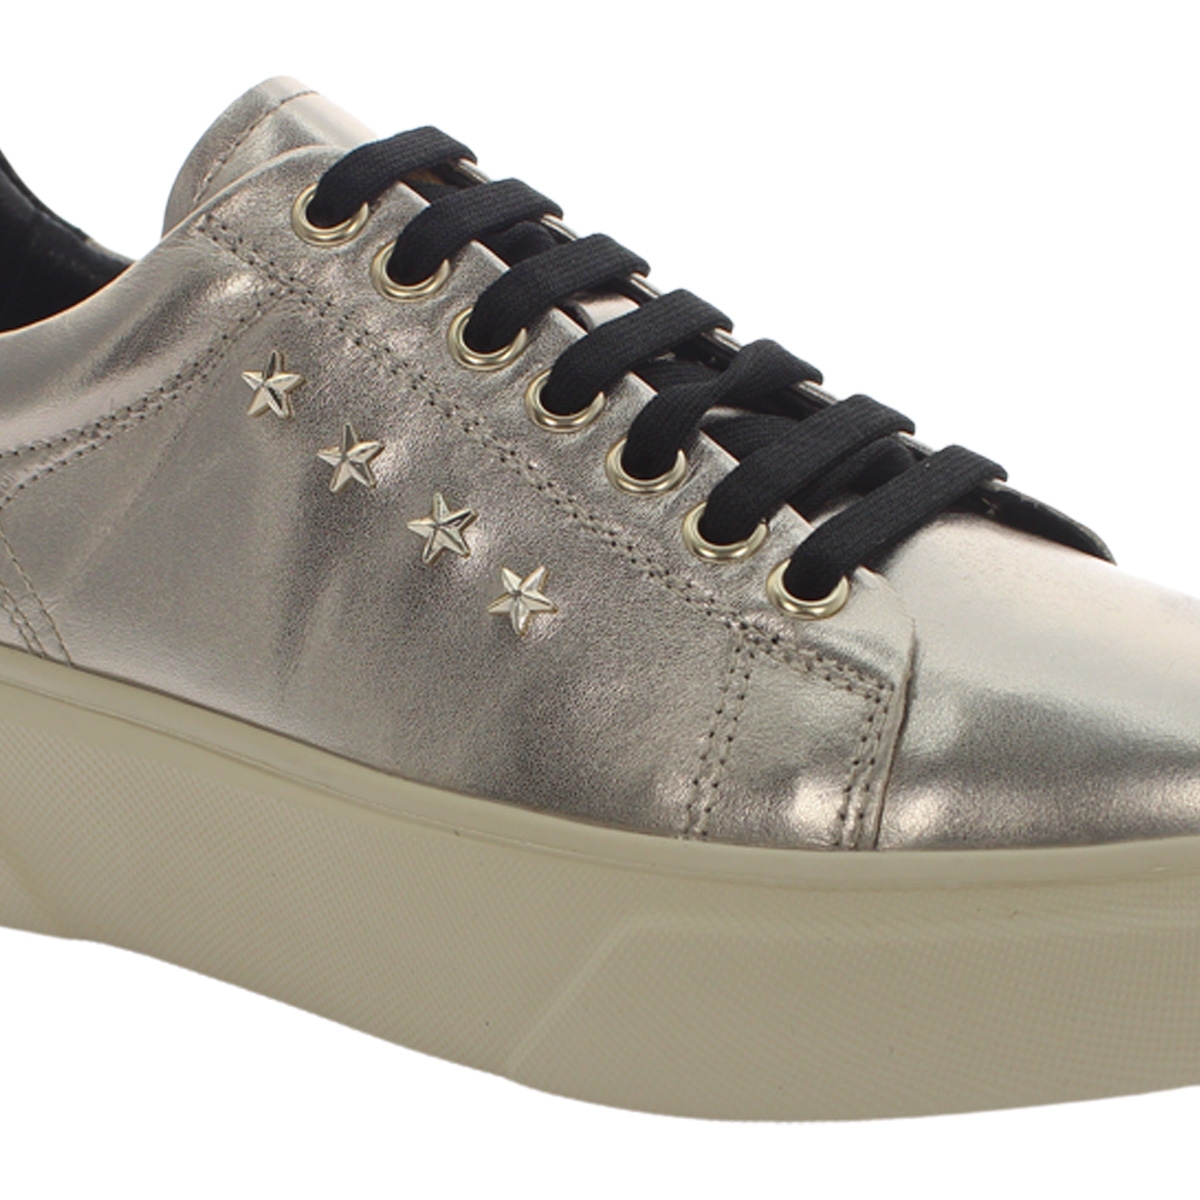 LEAH SNEAKERS DONNA